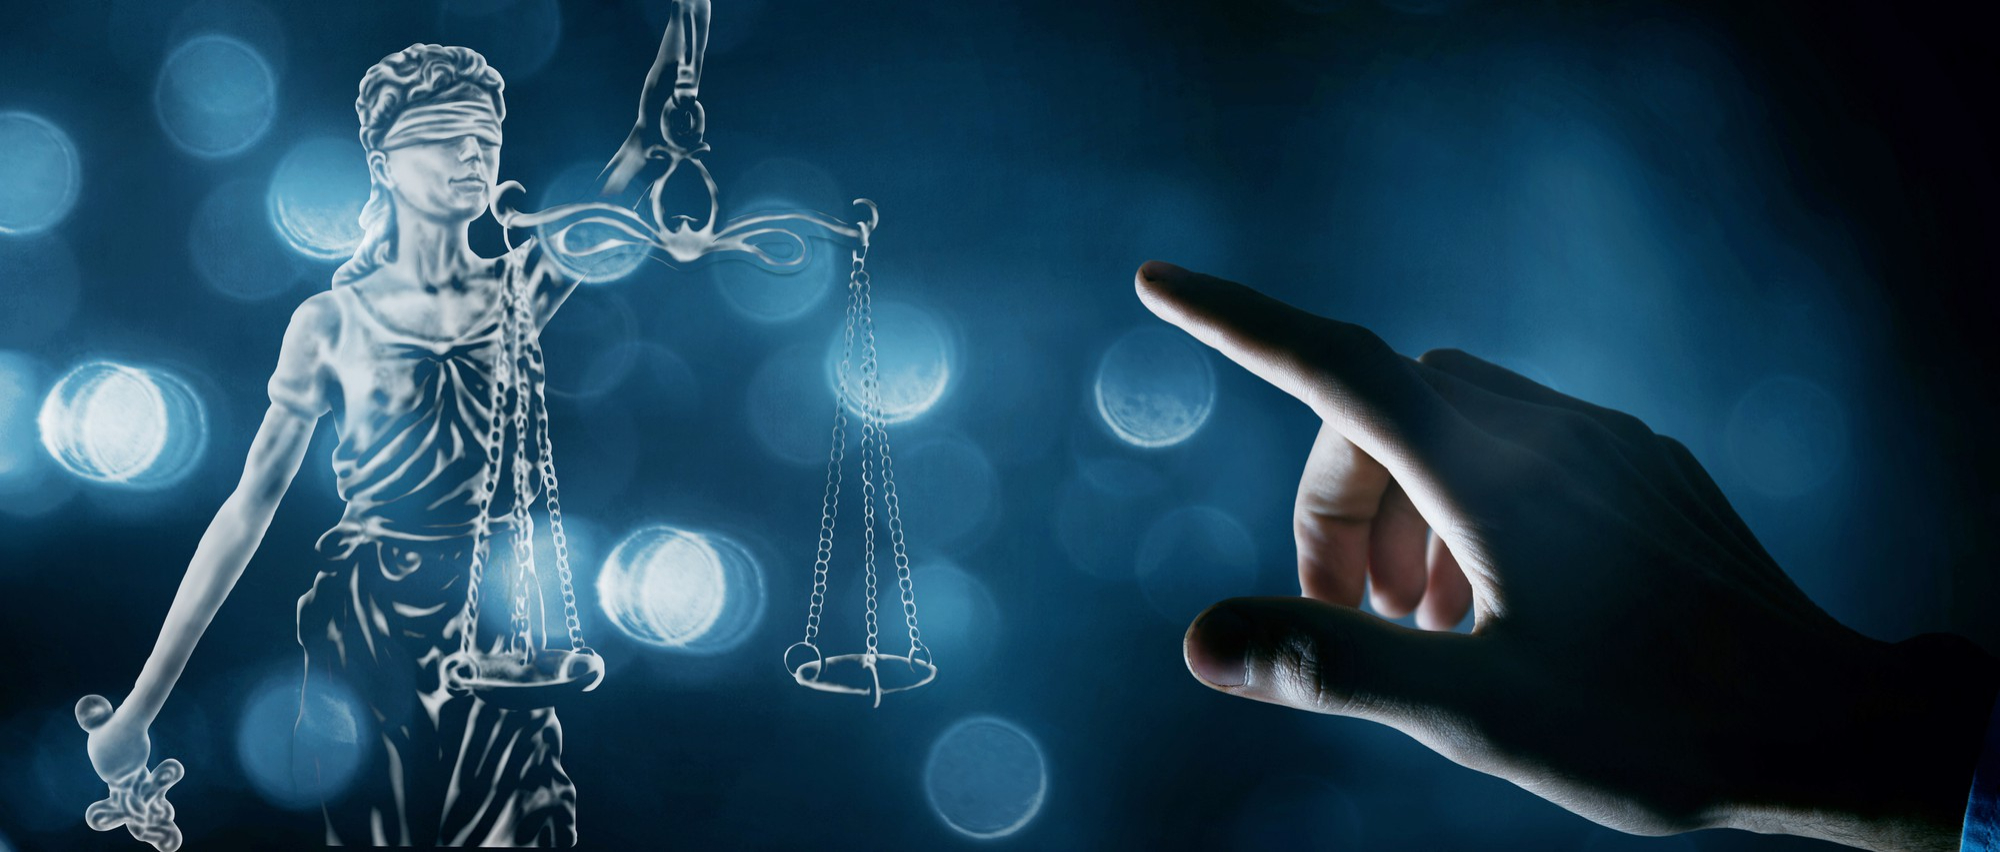 Co Partners | Digital Revolution in Law: The Impact of Technology on Justice